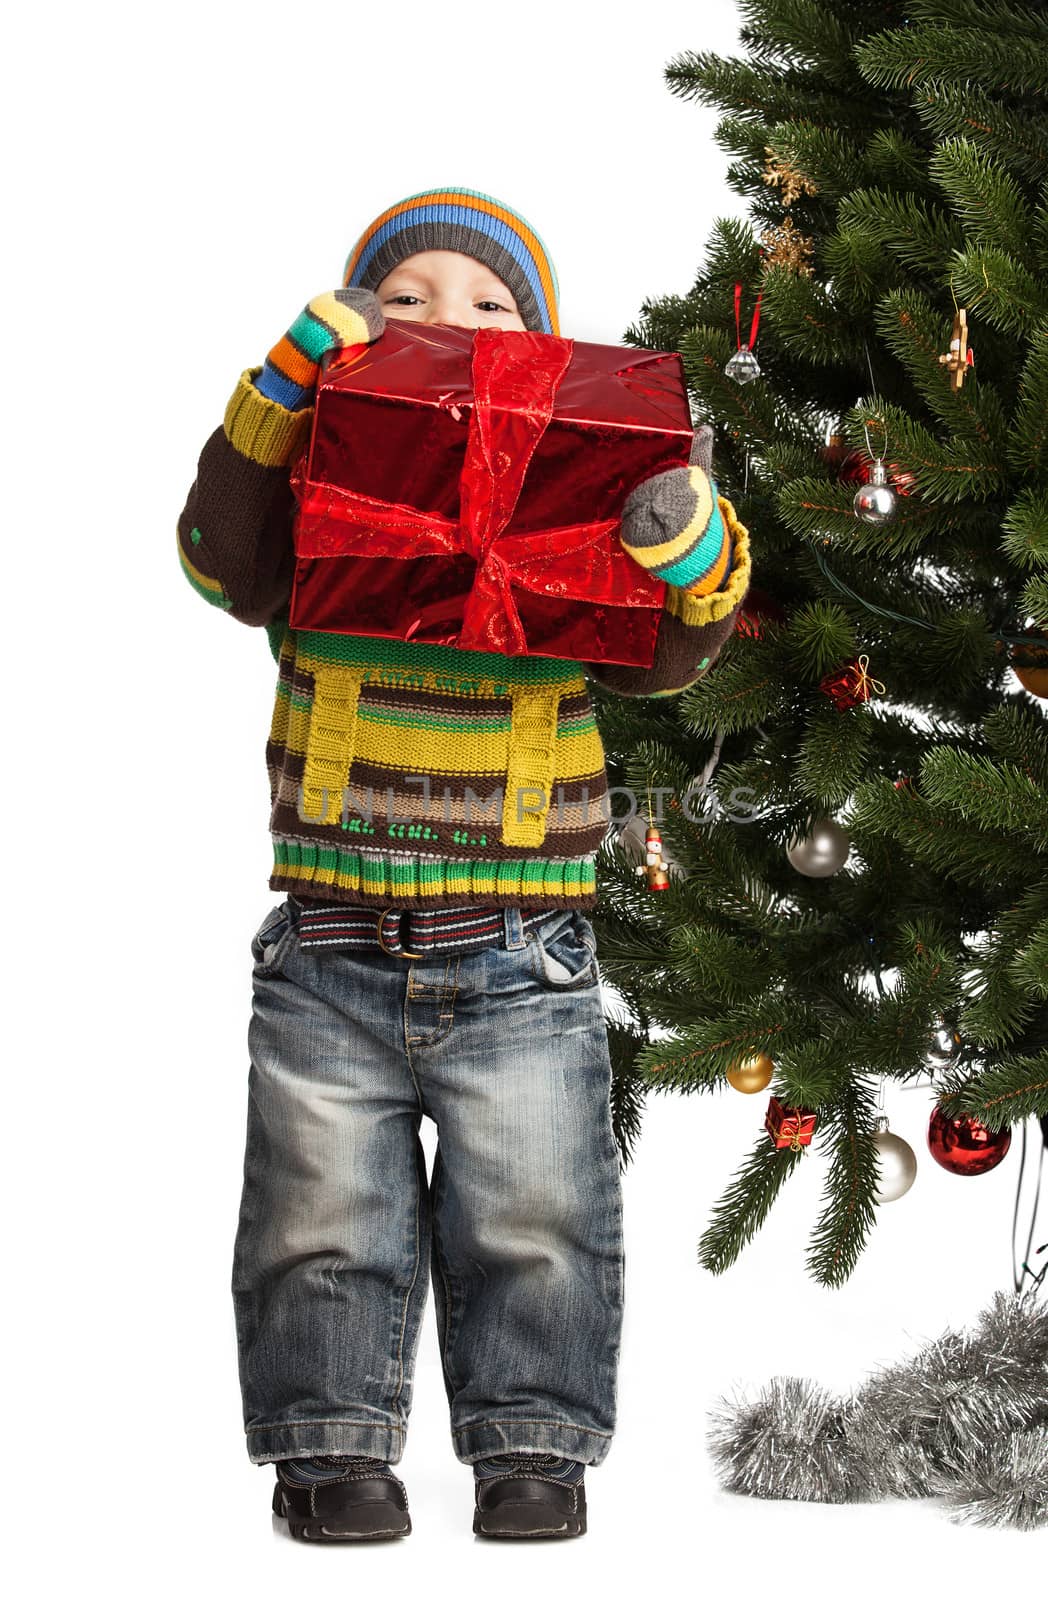 Cute little boy with gift near Christmas tree over white